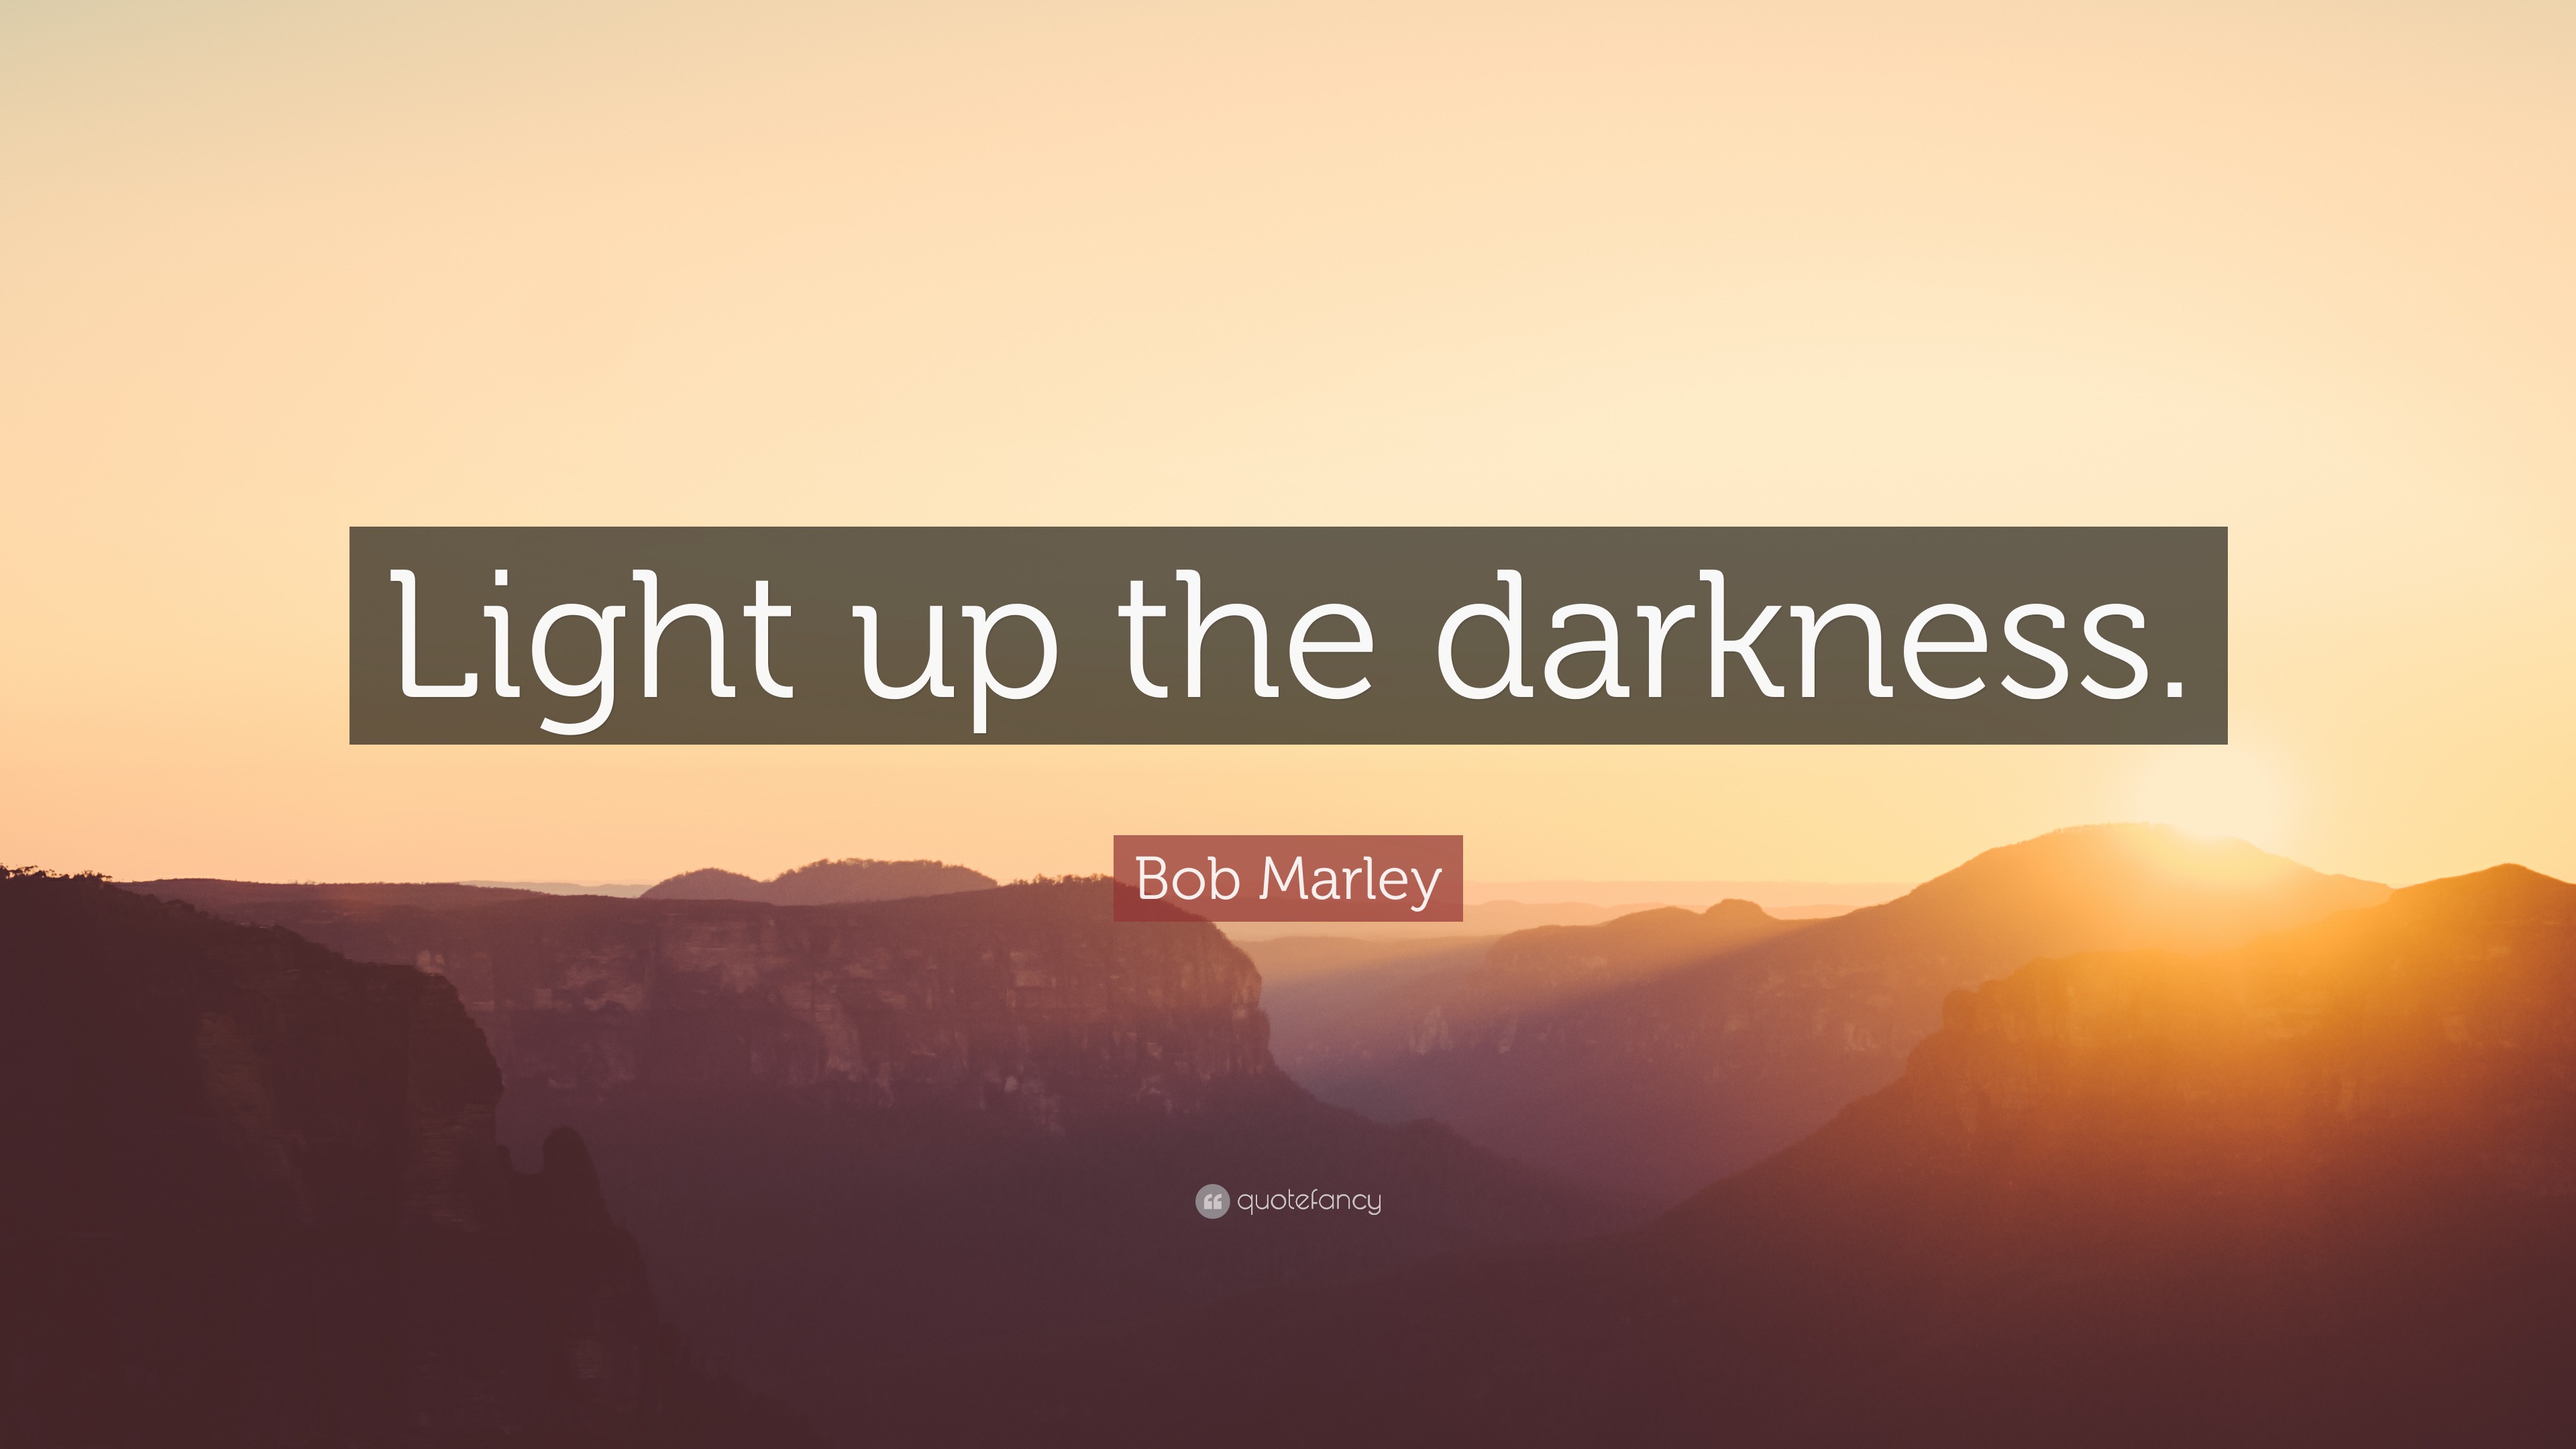 bob marley quote in the light of the darkness